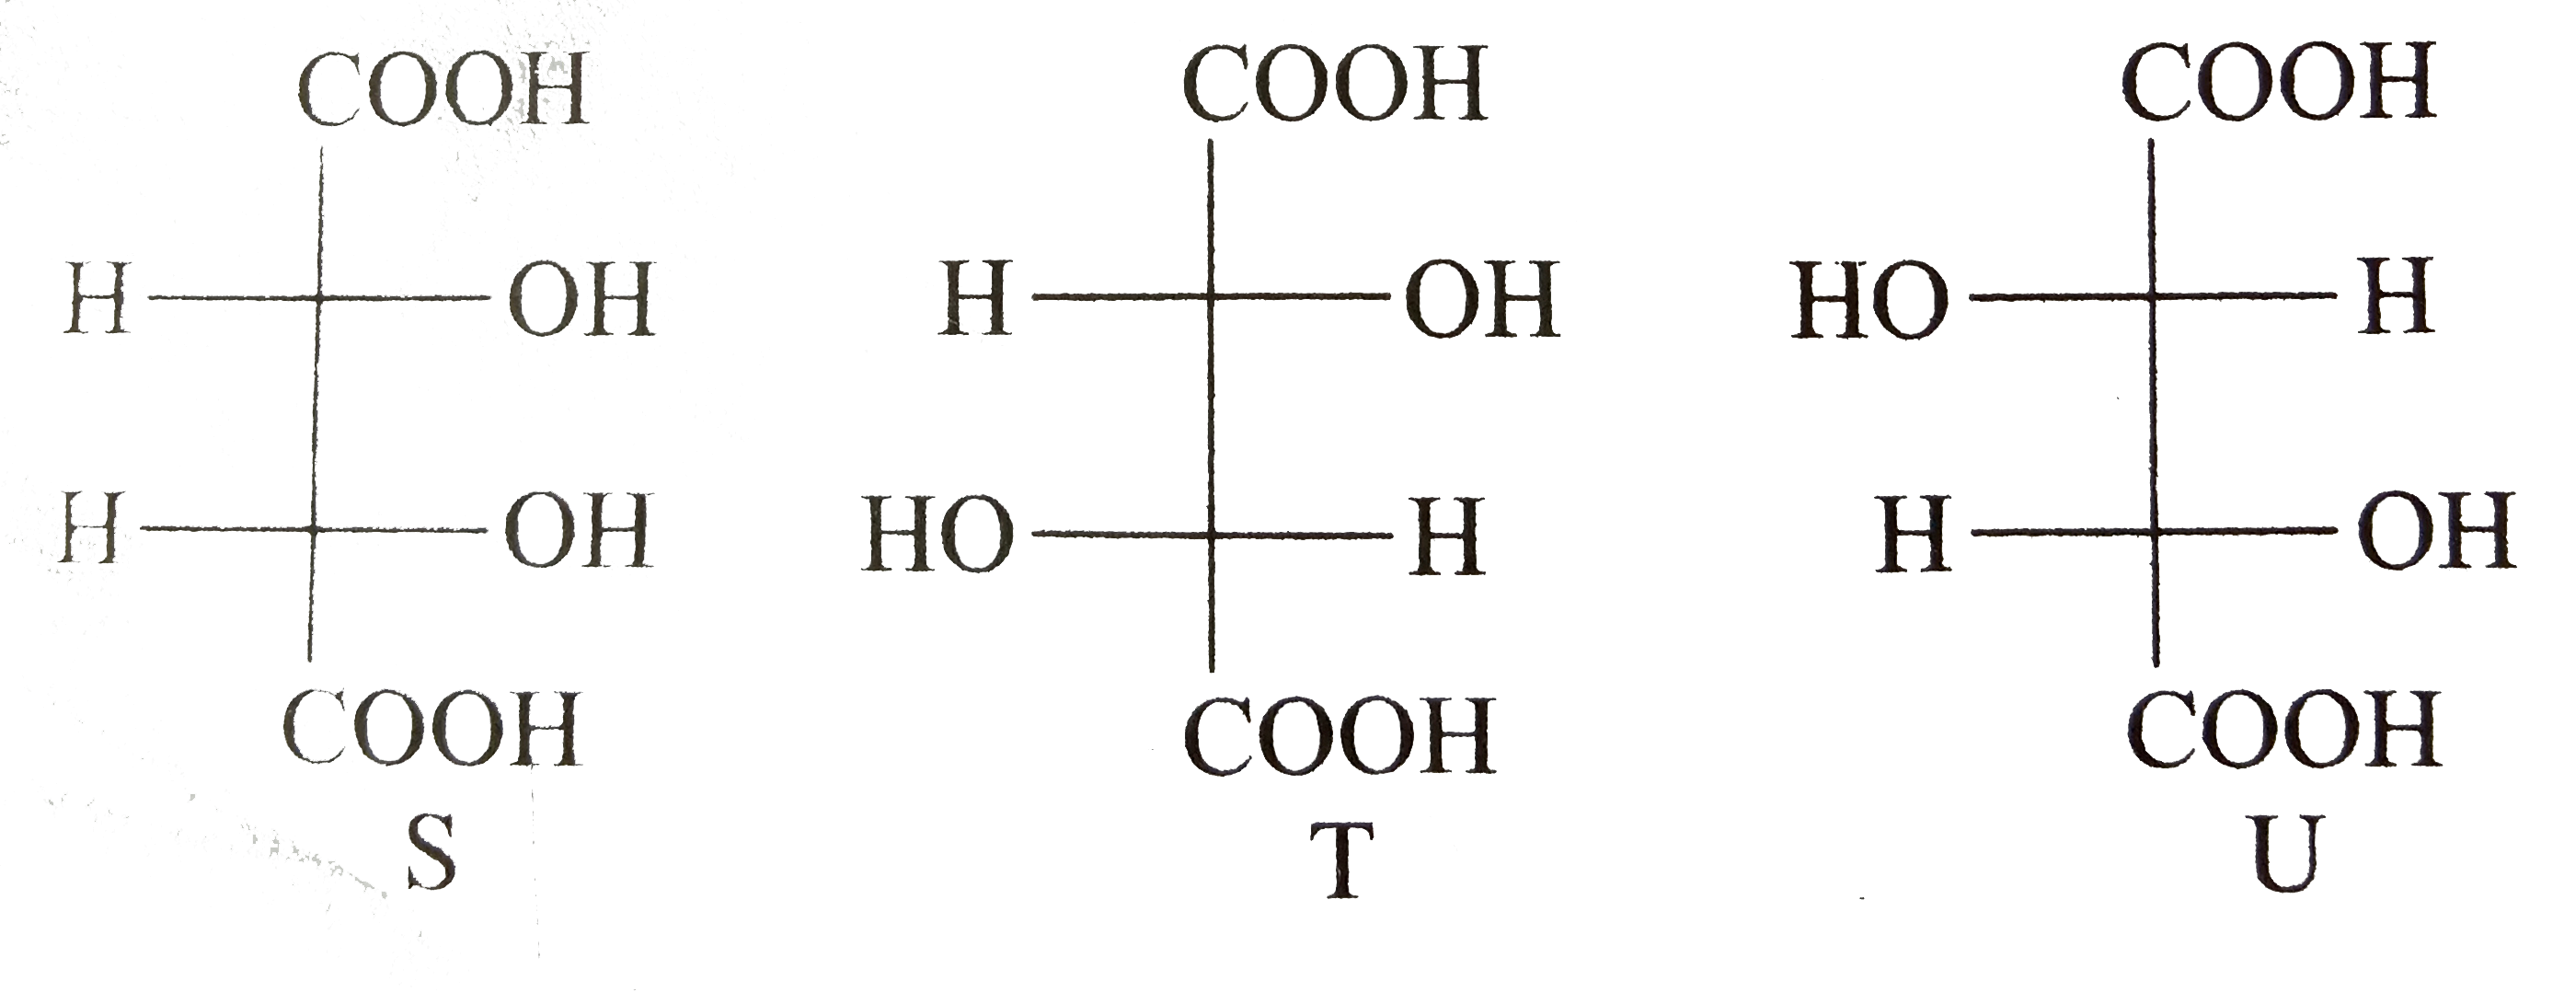 P and Q are isomers of dicarboxylic acid C(4)H(4)O(4). Bothdecolorize Br(2)//H(2)O. On heating, P forms the cyclic anhydride. Upon treatment with dilute alkaline KMnO(4),P as well as Q could produce one or more than one forms S,T and U.    Compounds formed from P and Q are, respectively